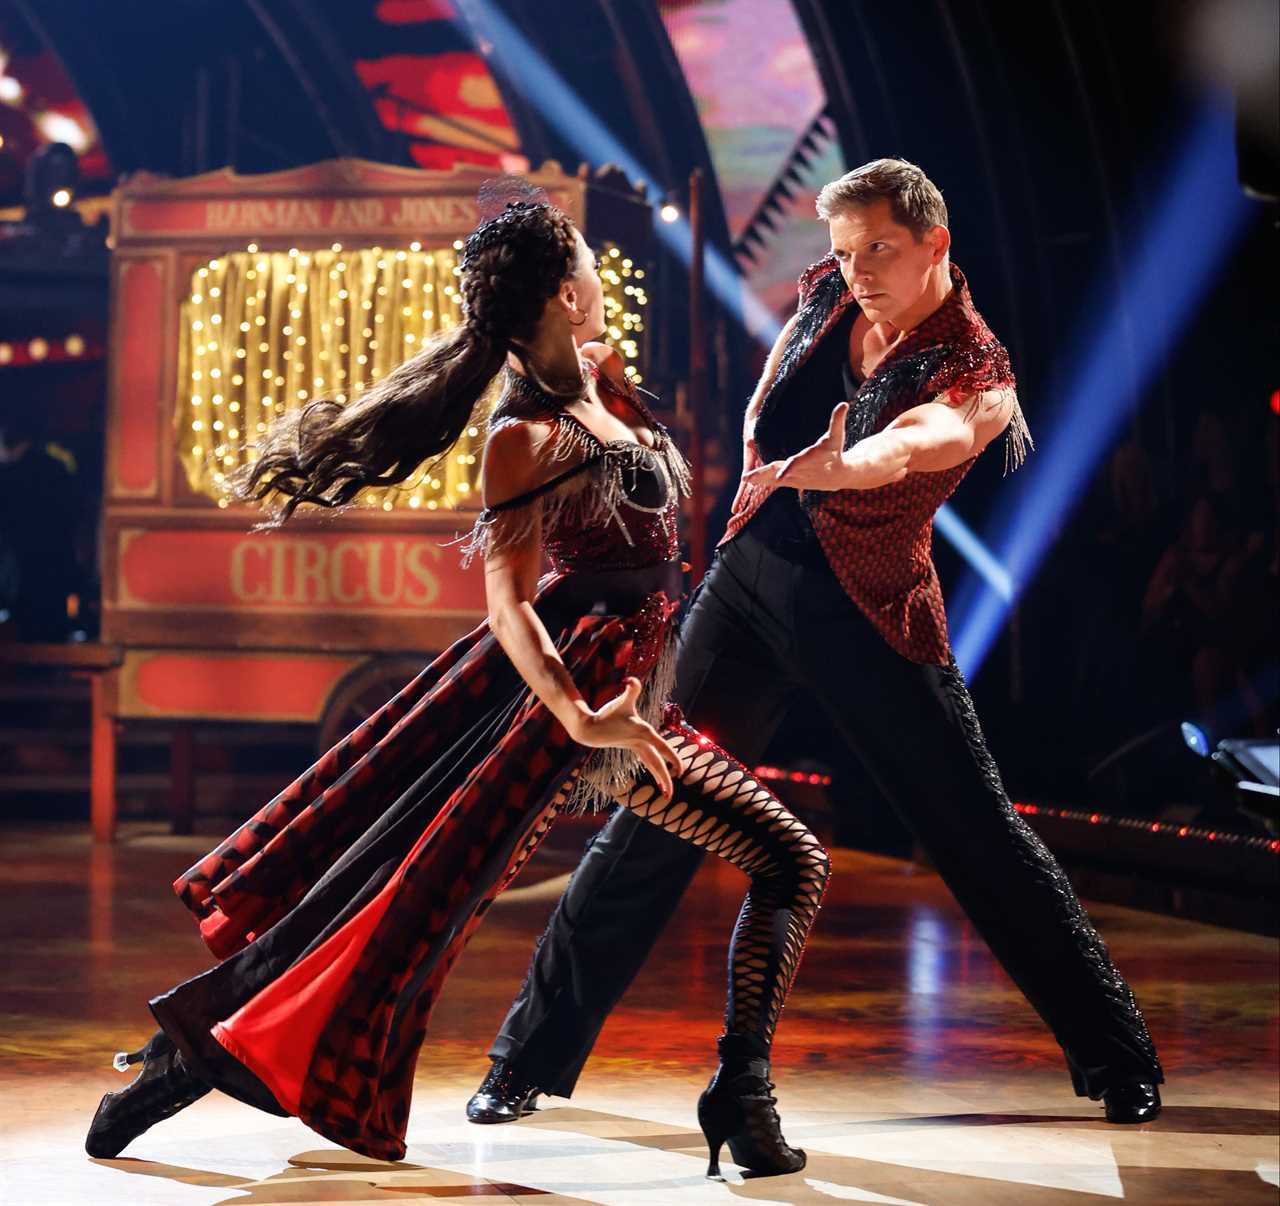 Strictly Come Dancing thrown into chaos as Nigel Harman forced to quit due to injury